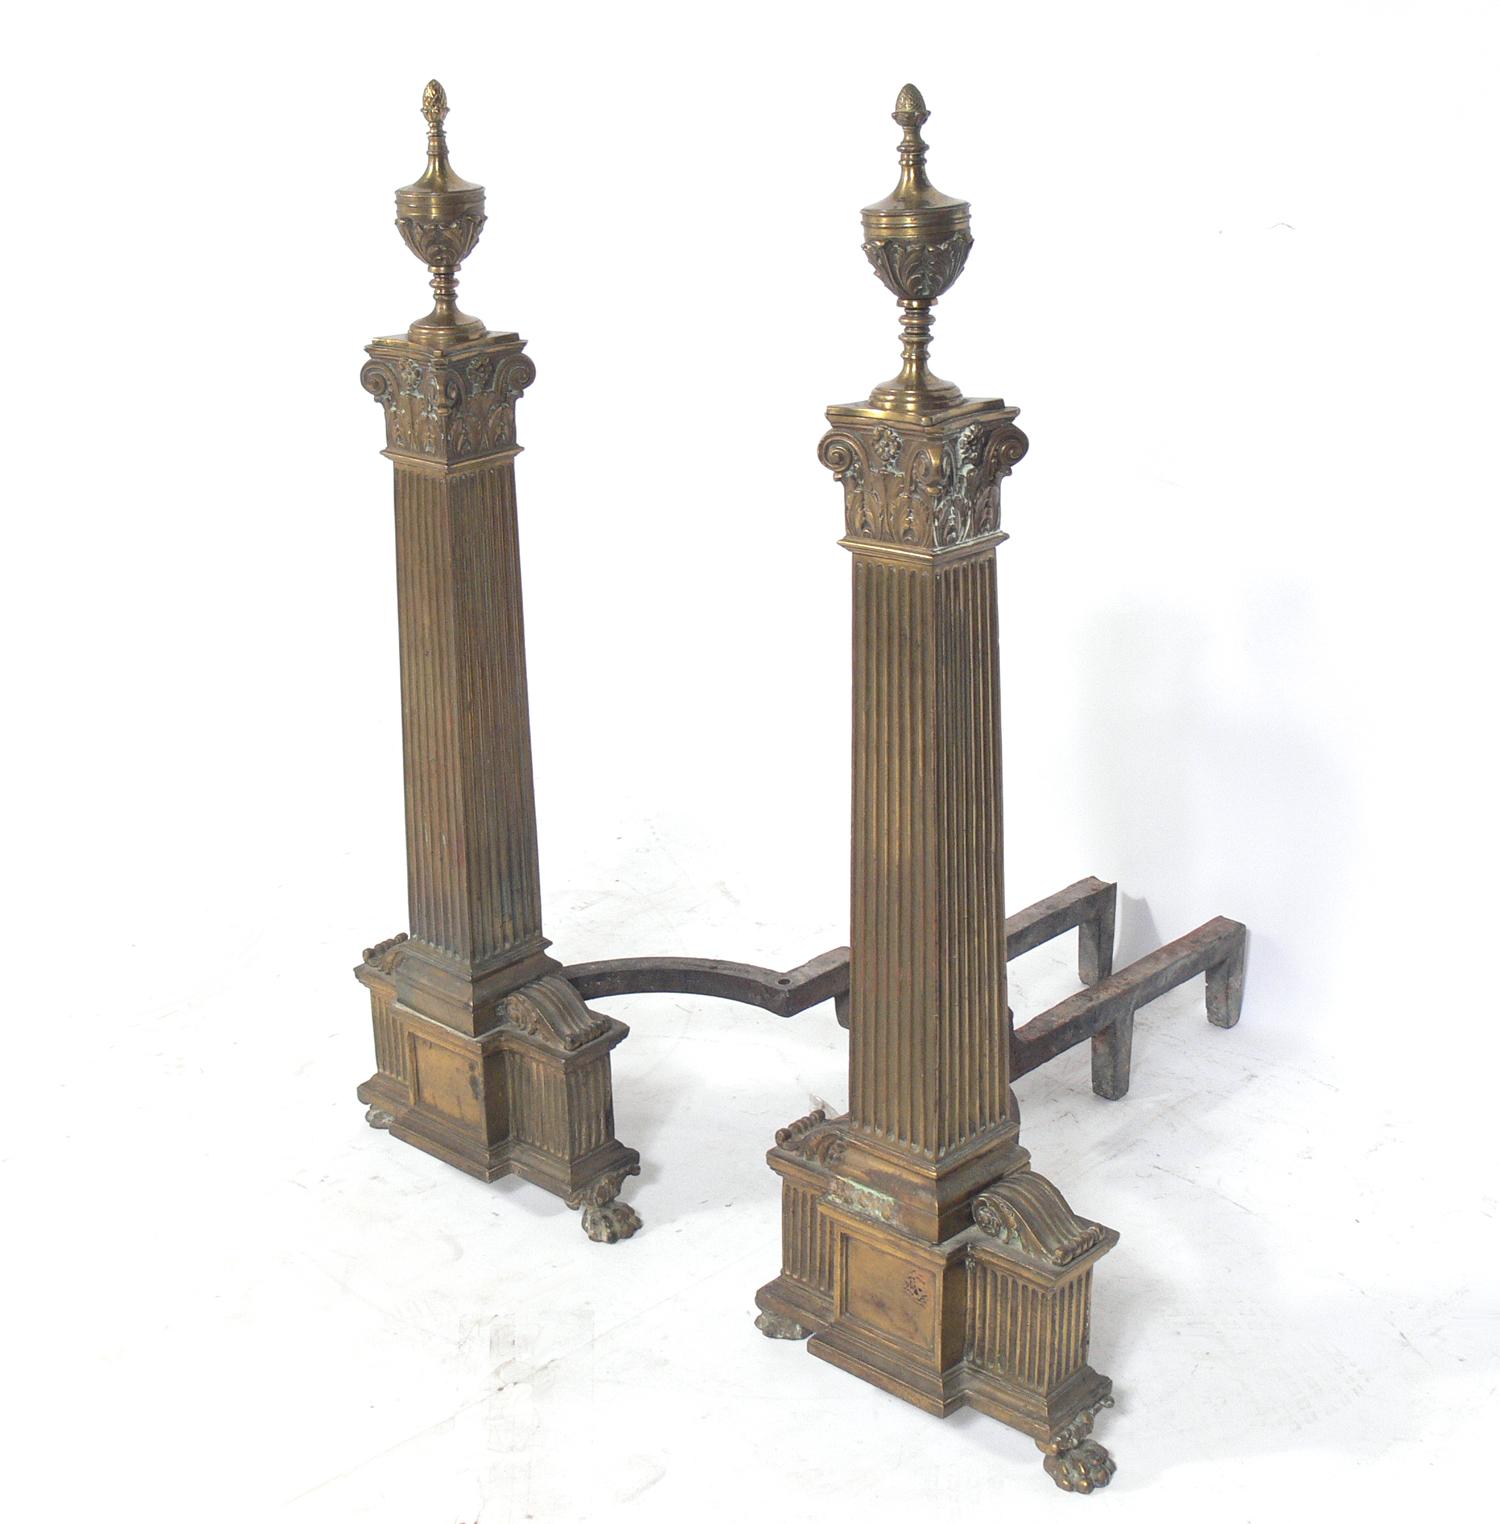 American Large Scale Andirons by Dorothy Draper for The Greenbrier Hotel